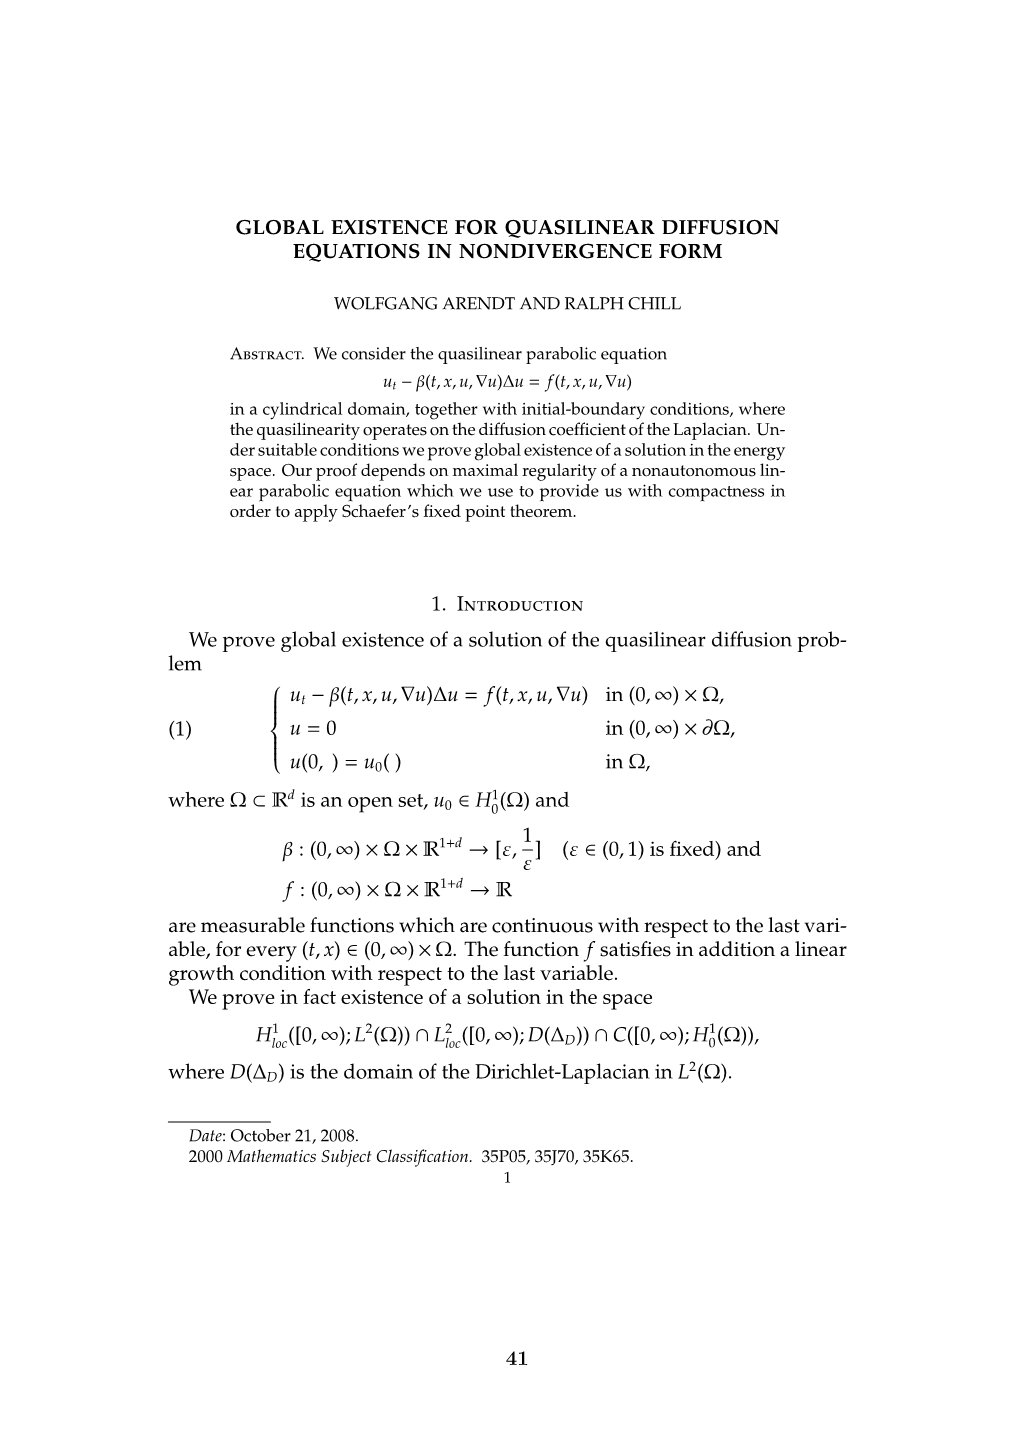 Global Existence for Quasilinear Diffusion Equations in Nondivergence Form